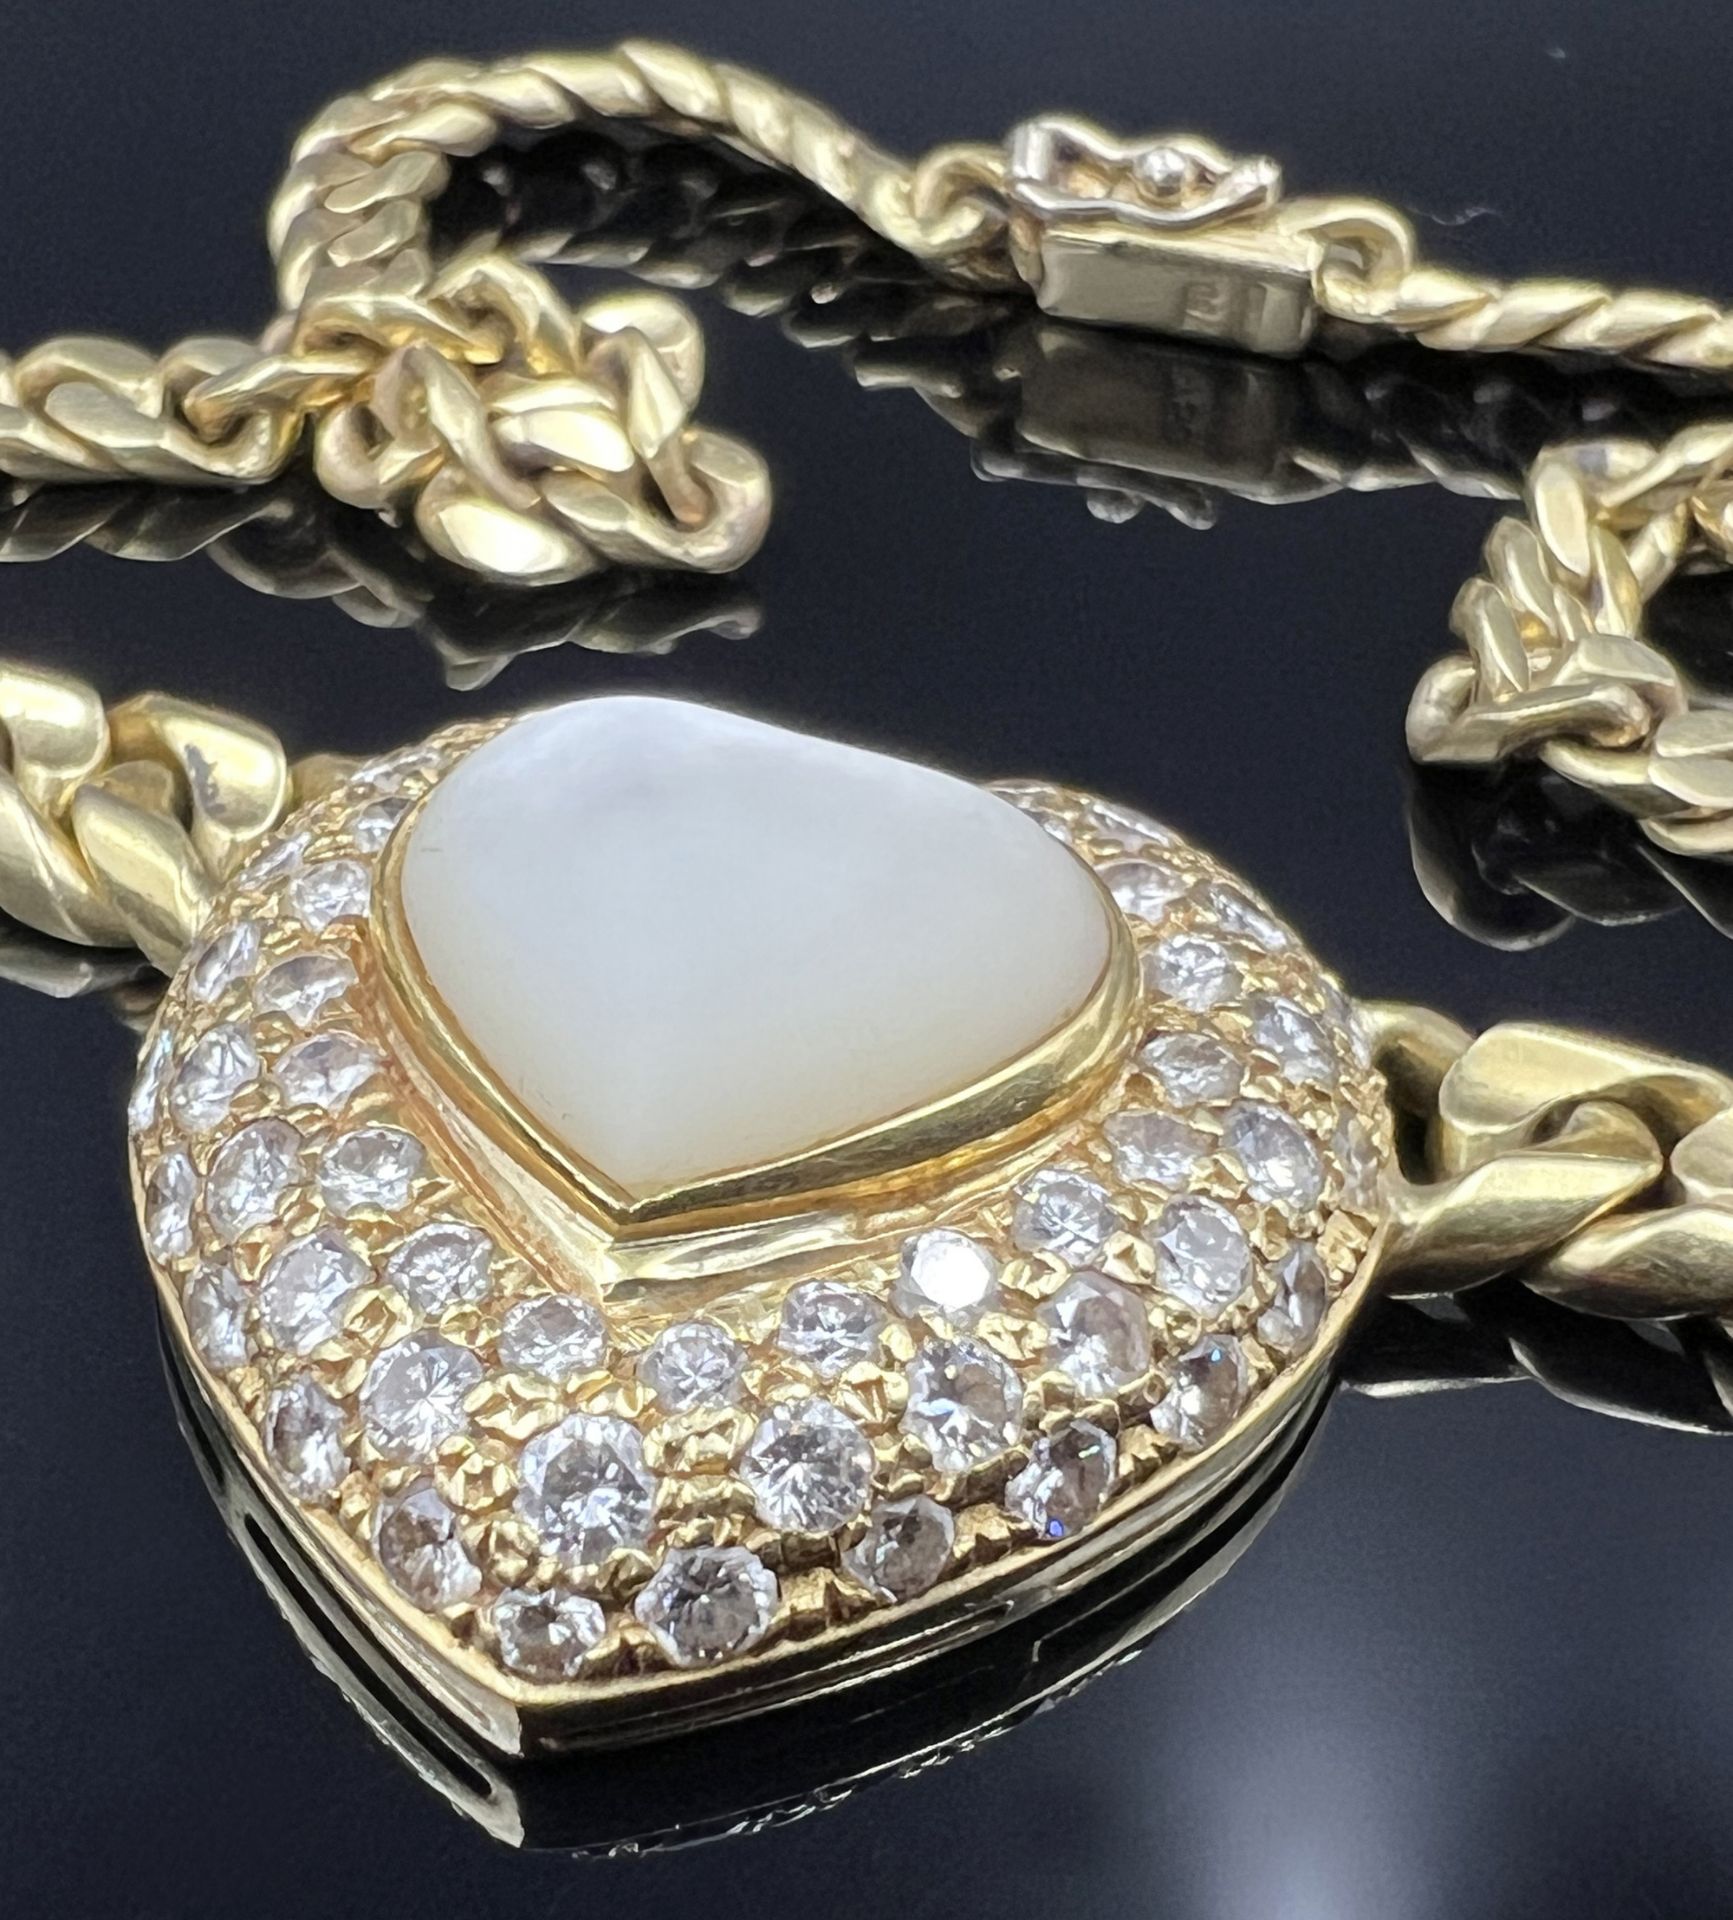 Necklace. 750 yellow gold with very small diamonds and probably satin-finished mother-of-pearl. - Image 3 of 10